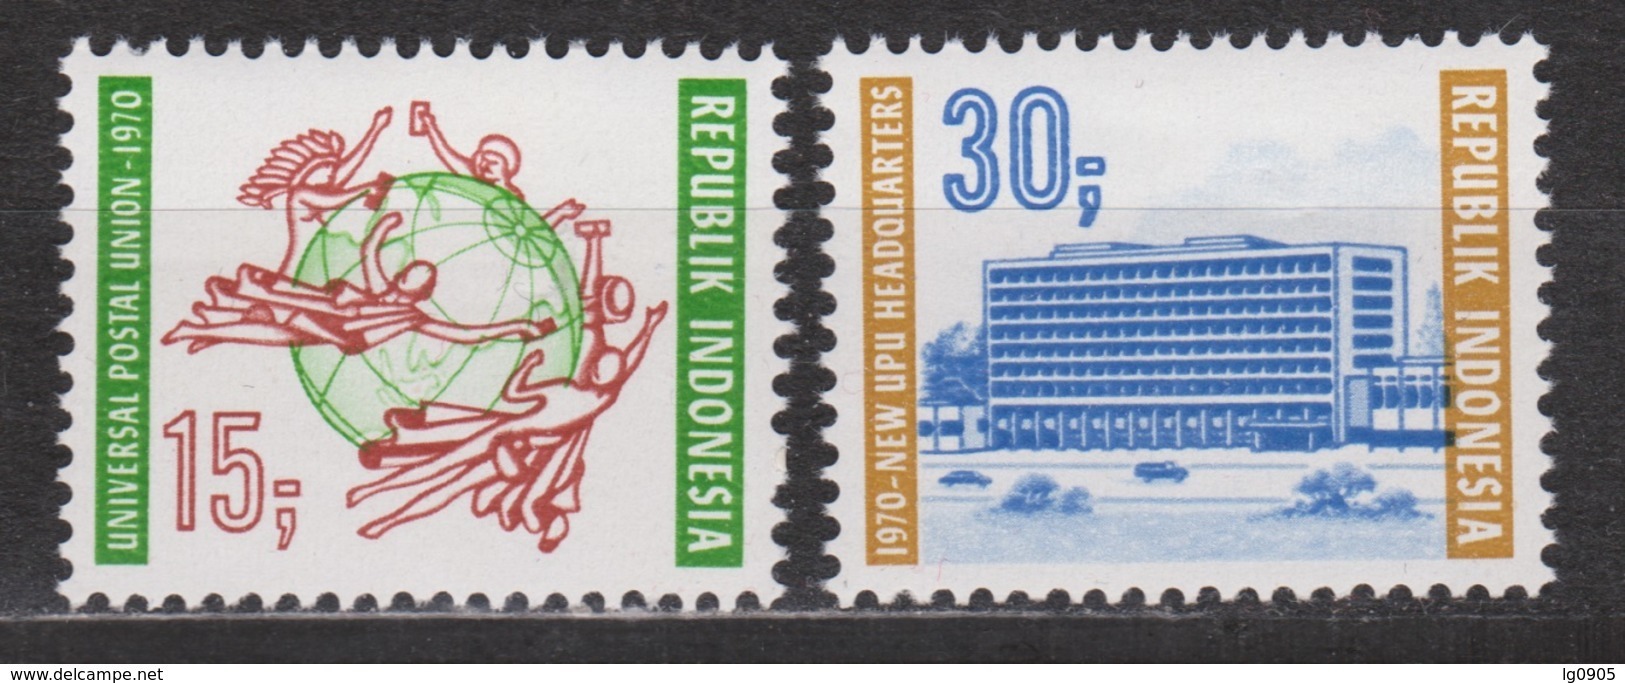 Indonesie 677-678 MNH New Head Quarters UPU 1970 ; NOW MANY STAMPS INDONESIA VERY CHEAP - Indonesië